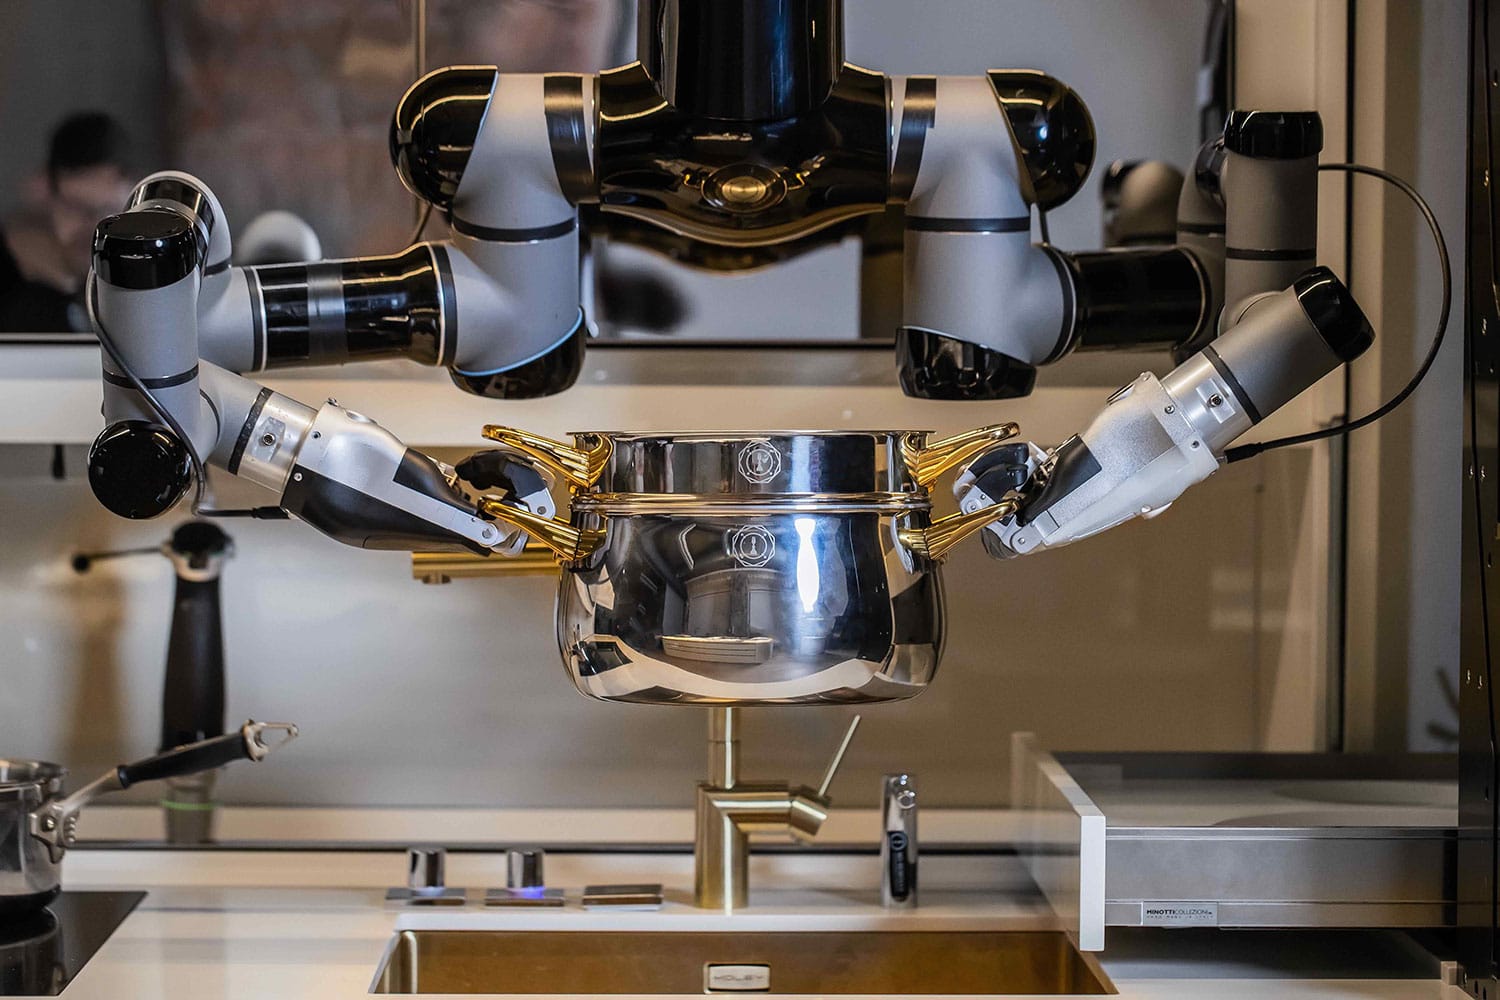 Moley Robotic kitchen assistant can cook up to 5,000 different recipes